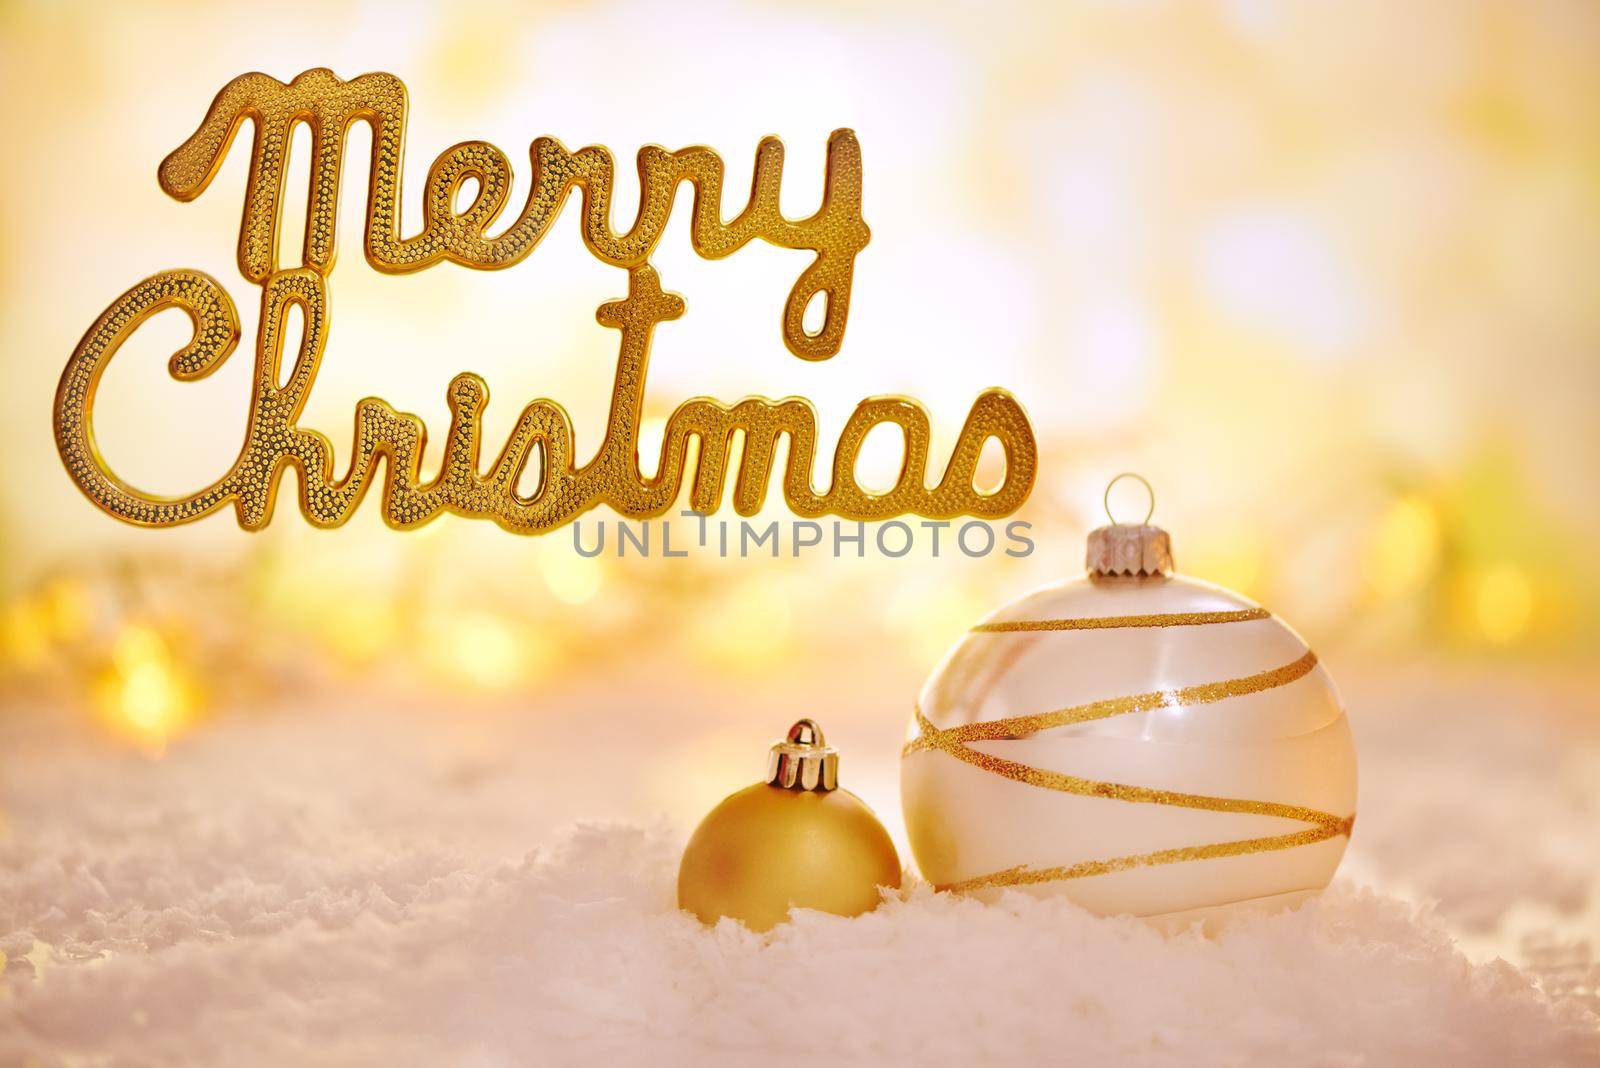 Shot of golden Christmas decorations with a merry christmas message.